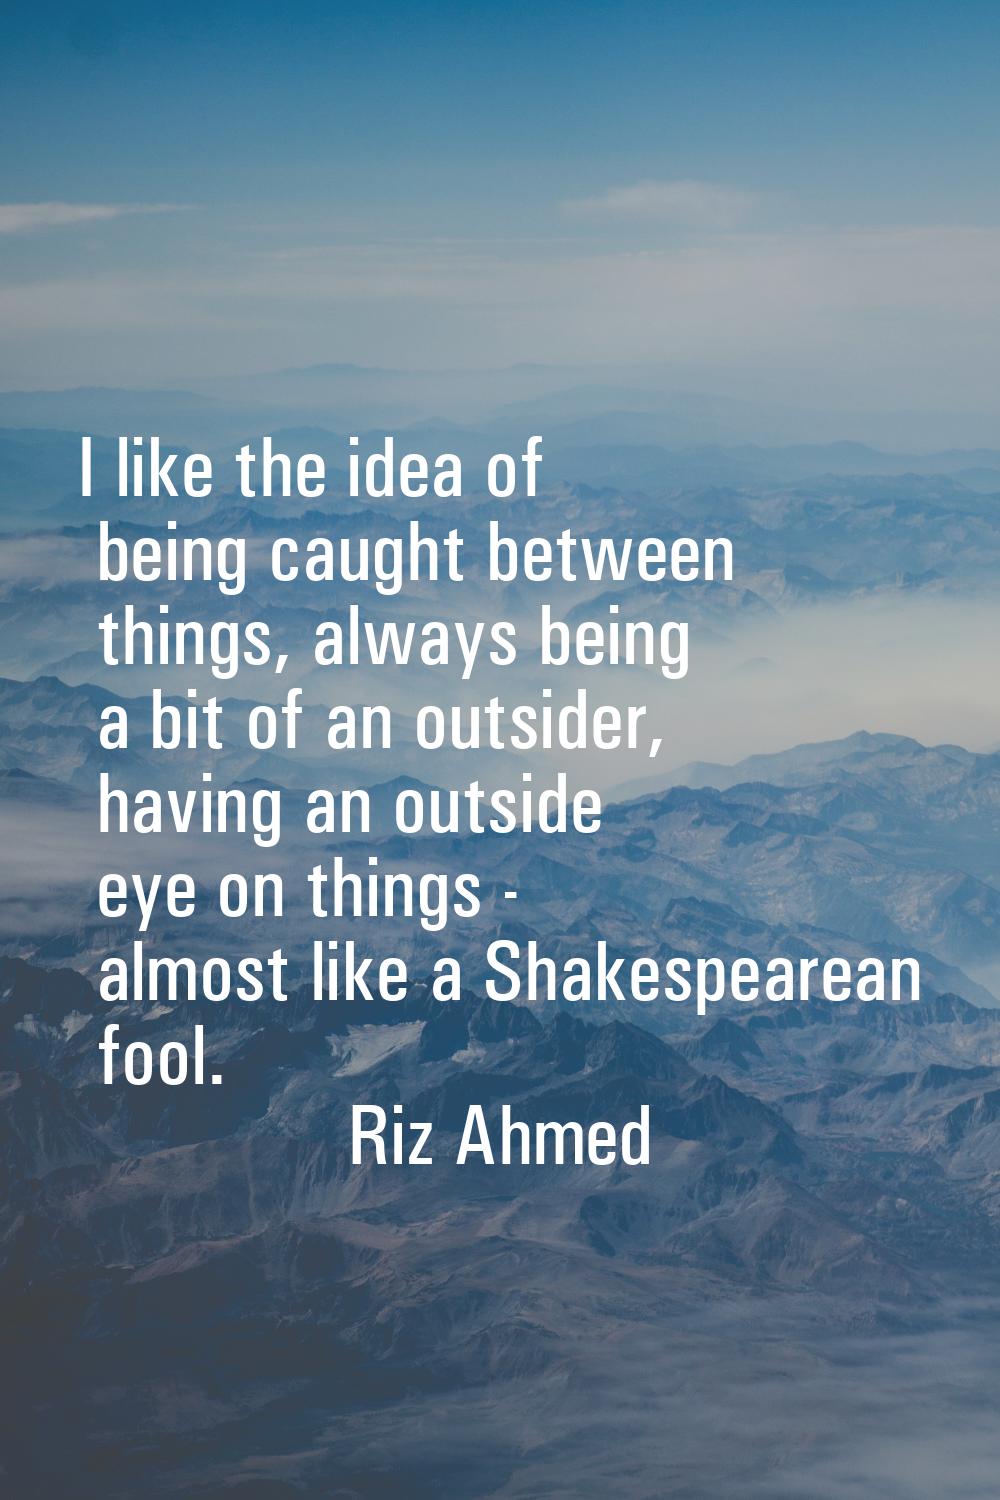 I like the idea of being caught between things, always being a bit of an outsider, having an outsid